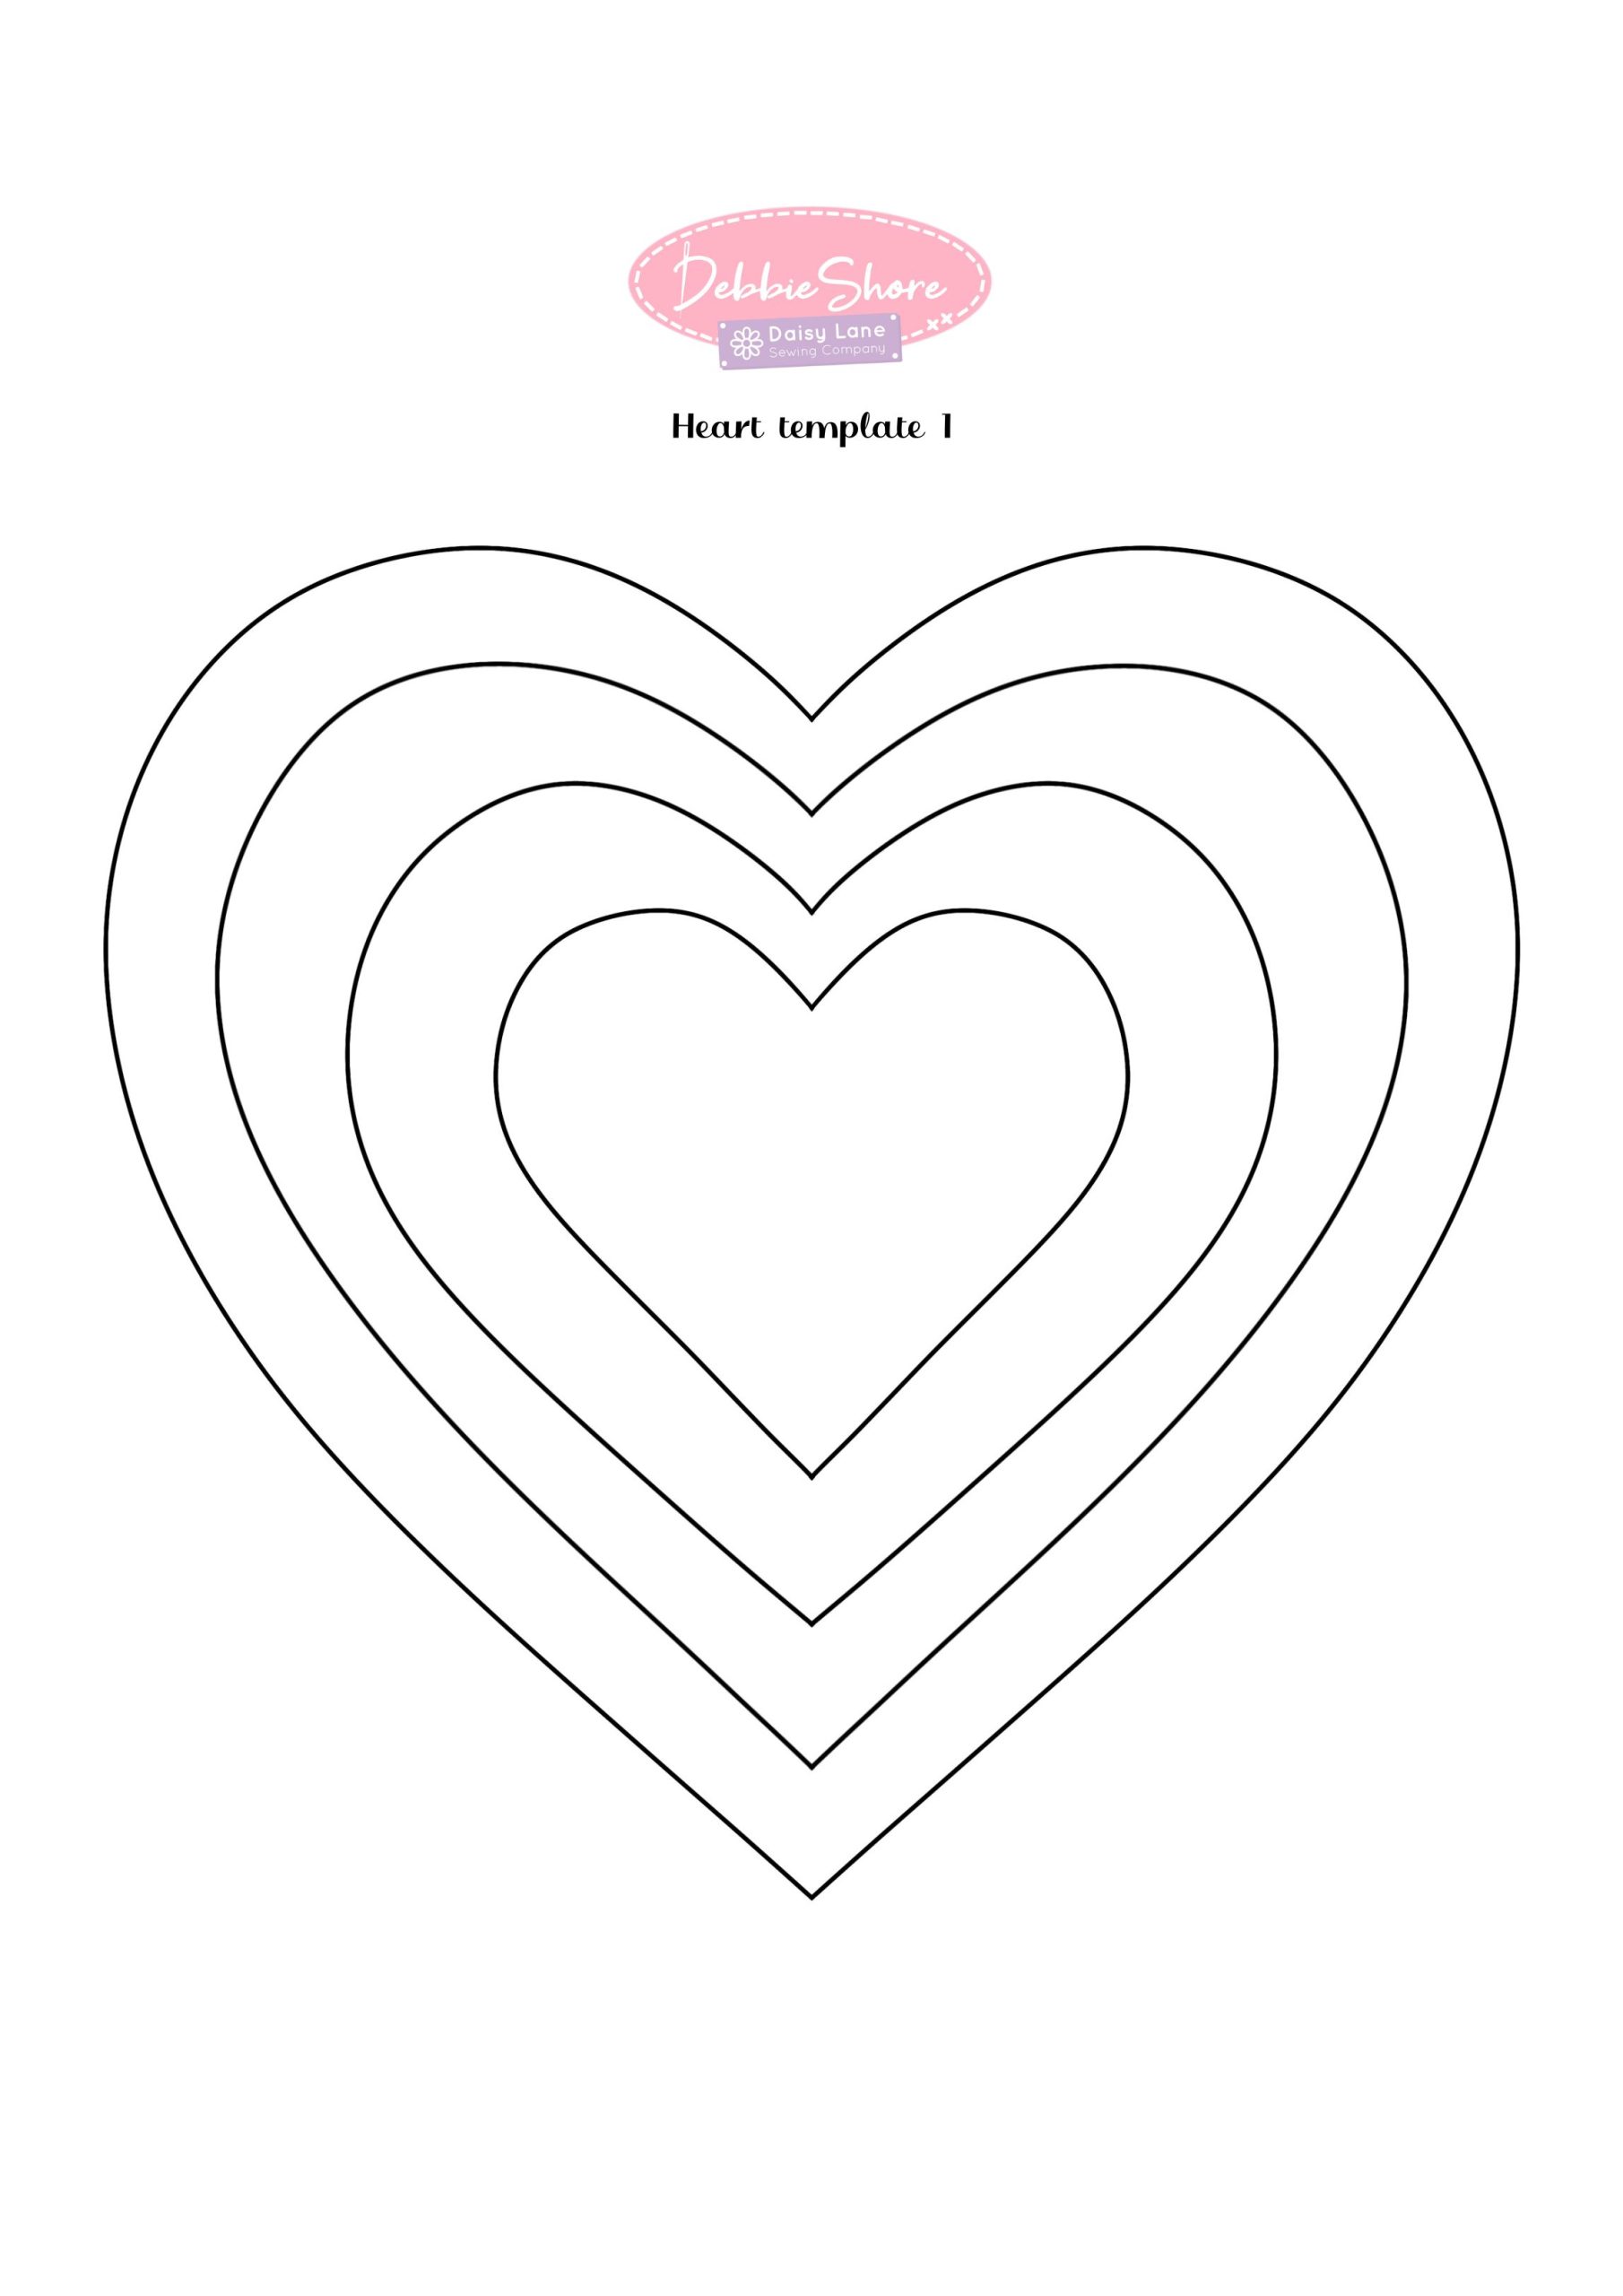 https://www.debbieshoresewing.com/wp-content/uploads/2023/01/hearts-2-scaled.jpg